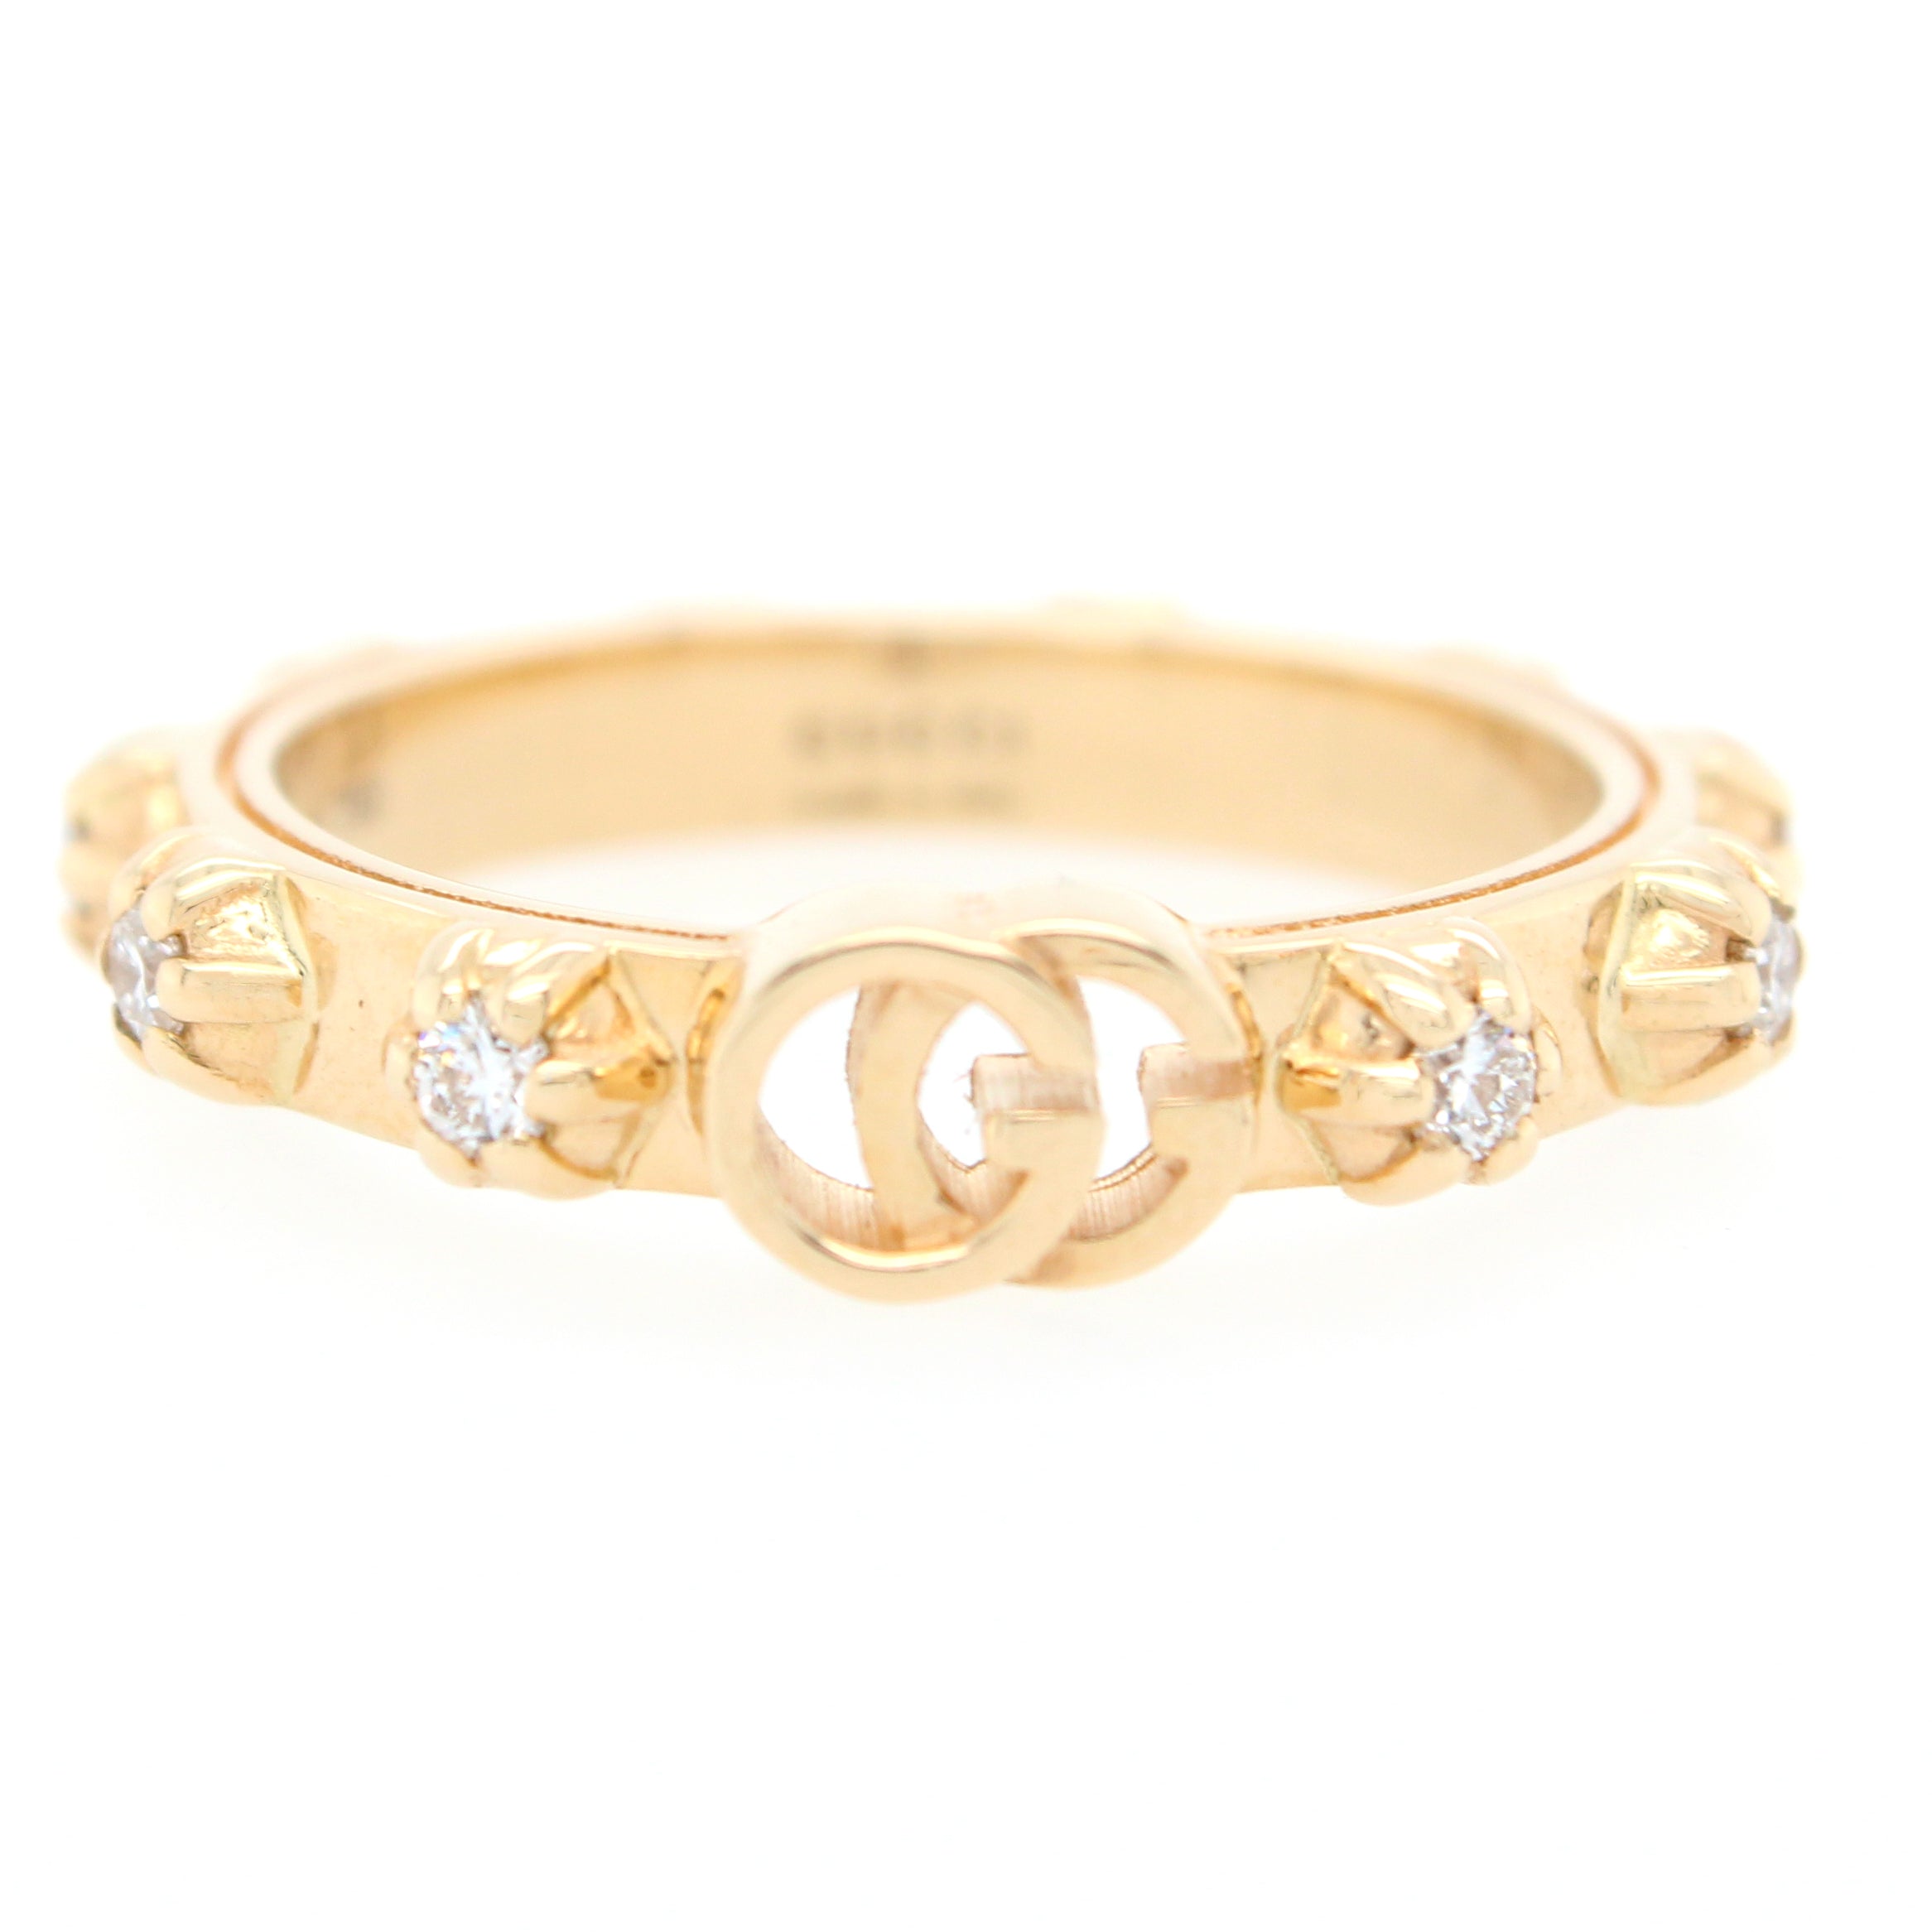 Gucci 18k Yellow Gold 13mm GG Running Ring | Gucci gold ring, Gucci  jewelry, Gold